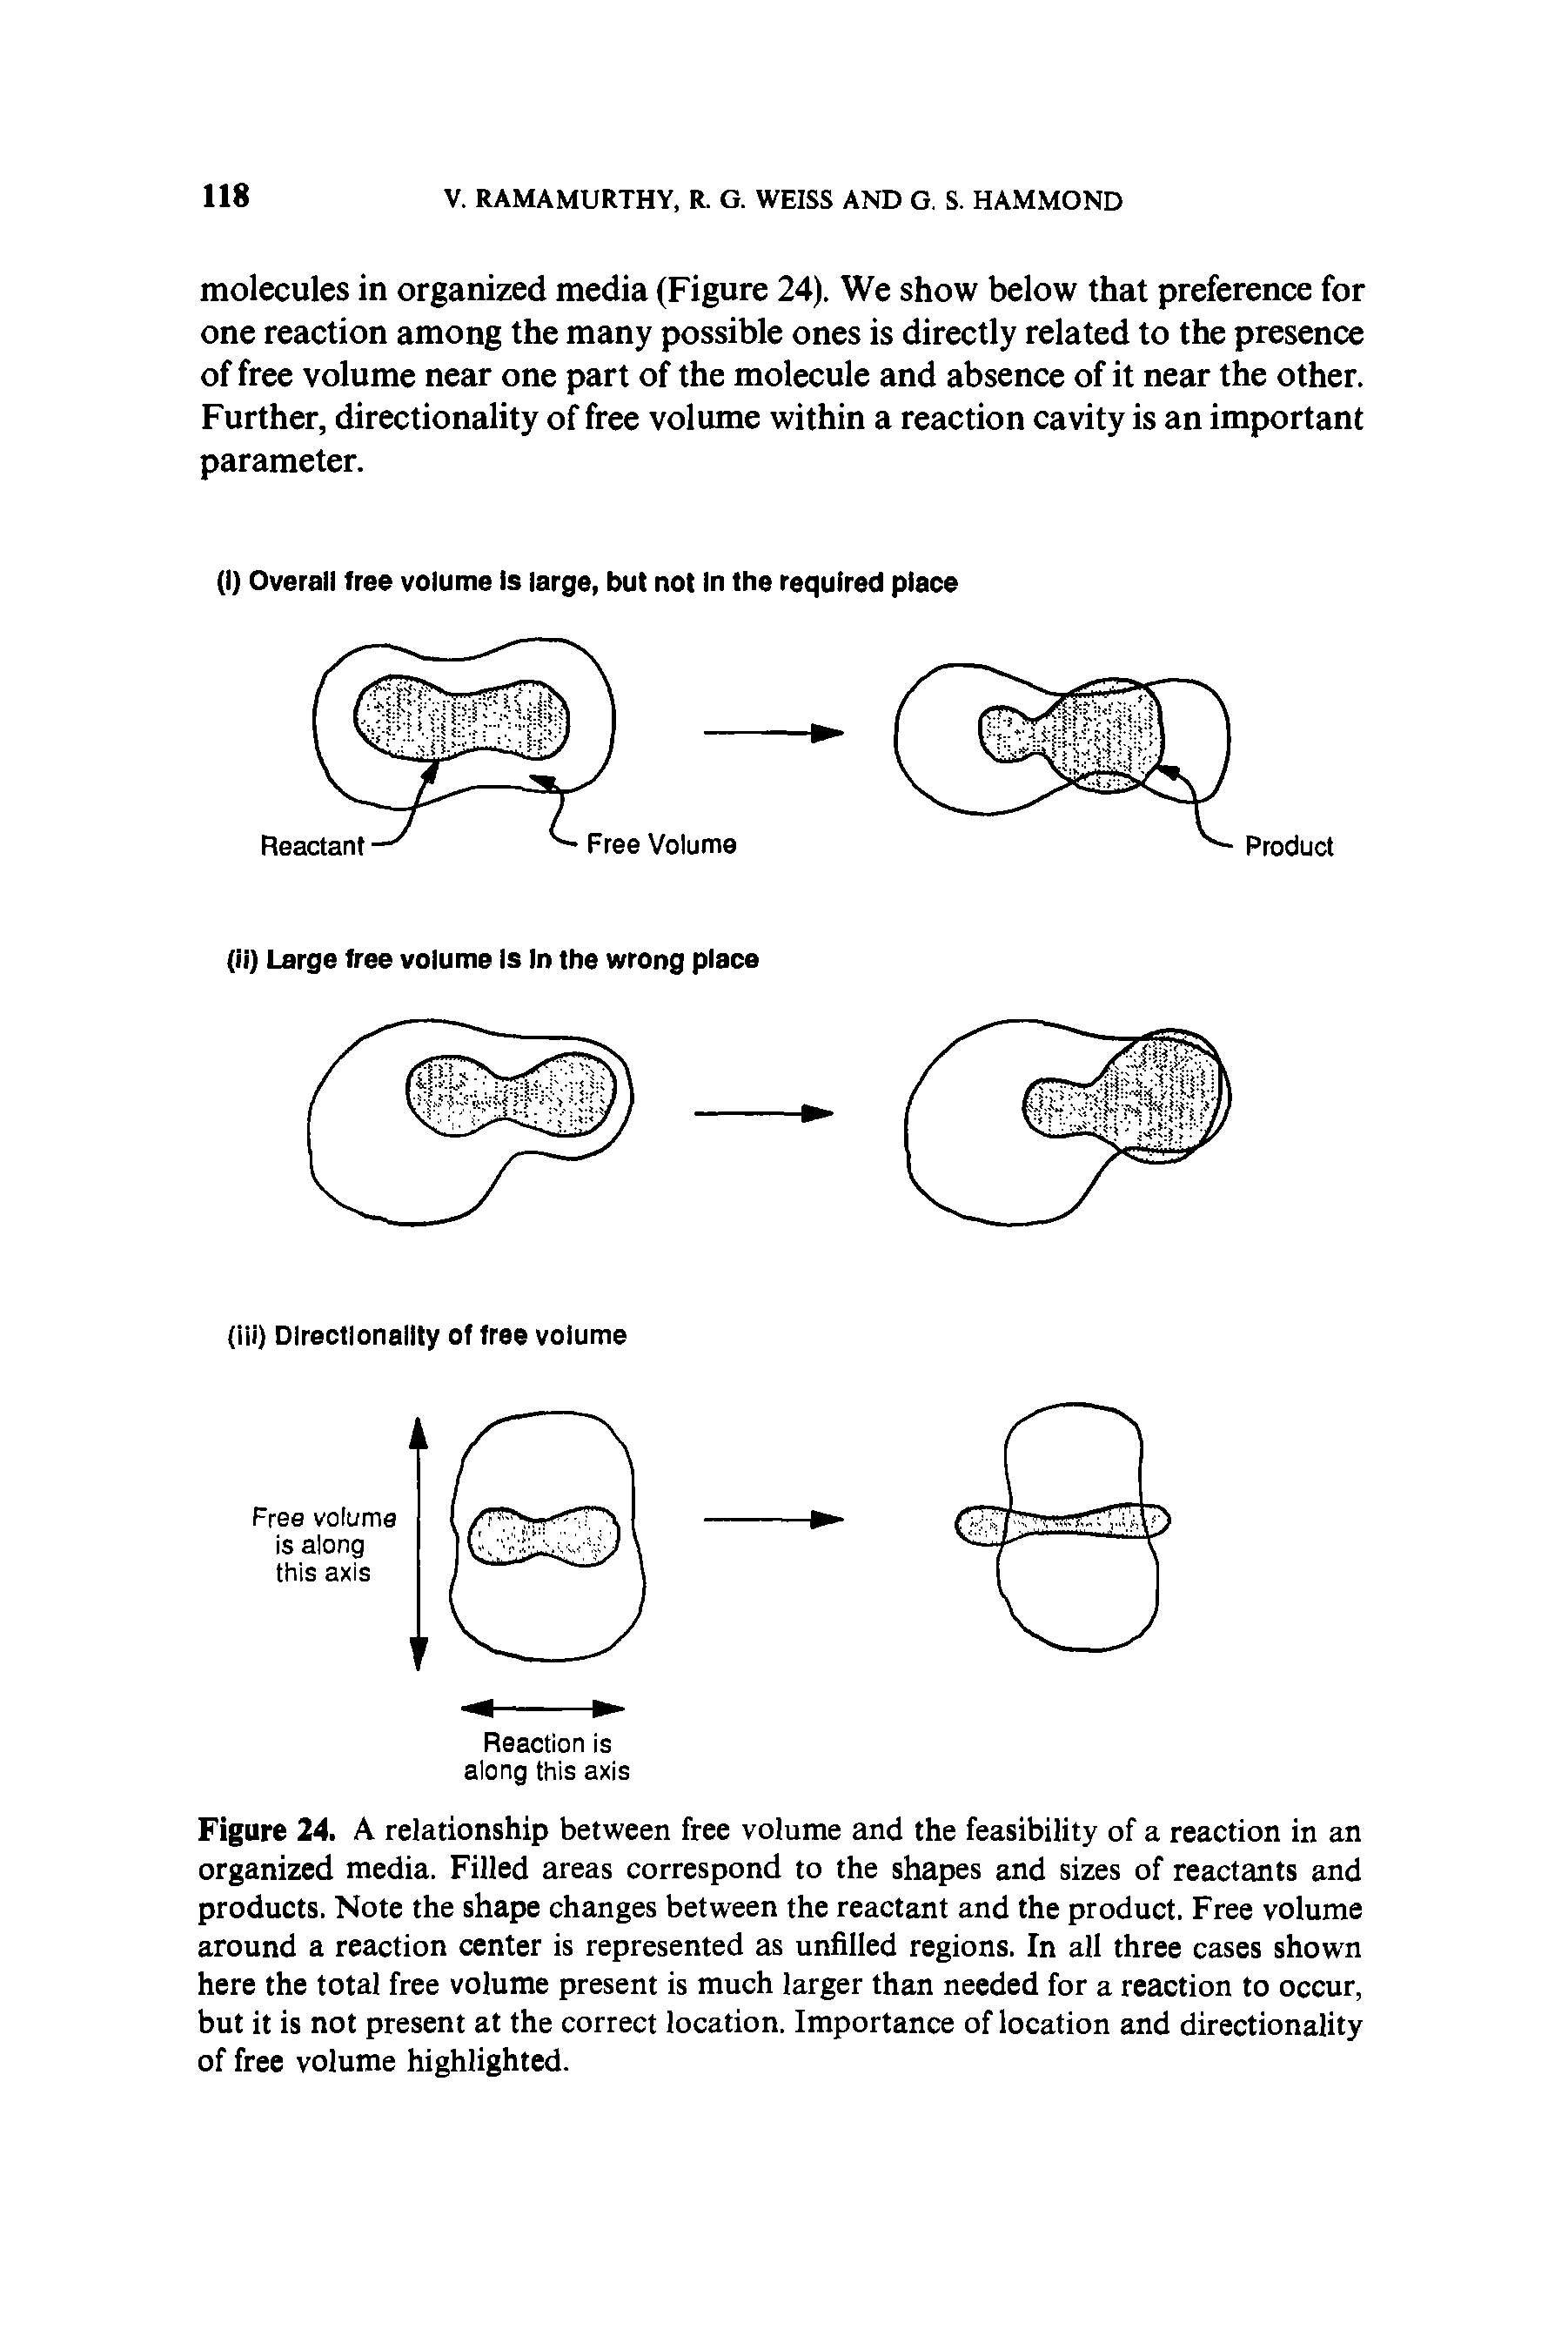 Figure 24. A relationship between free volume and the feasibility of a reaction in an organized media. Filled areas correspond to the shapes and sizes of reactants and products. Note the shape changes between the reactant and the product. Free volume around a reaction center is represented as unfilled regions. In all three cases shown here the total free volume present is much larger than needed for a reaction to occur, but it is not present at the correct location. Importance of location and directionality of free volume highlighted.